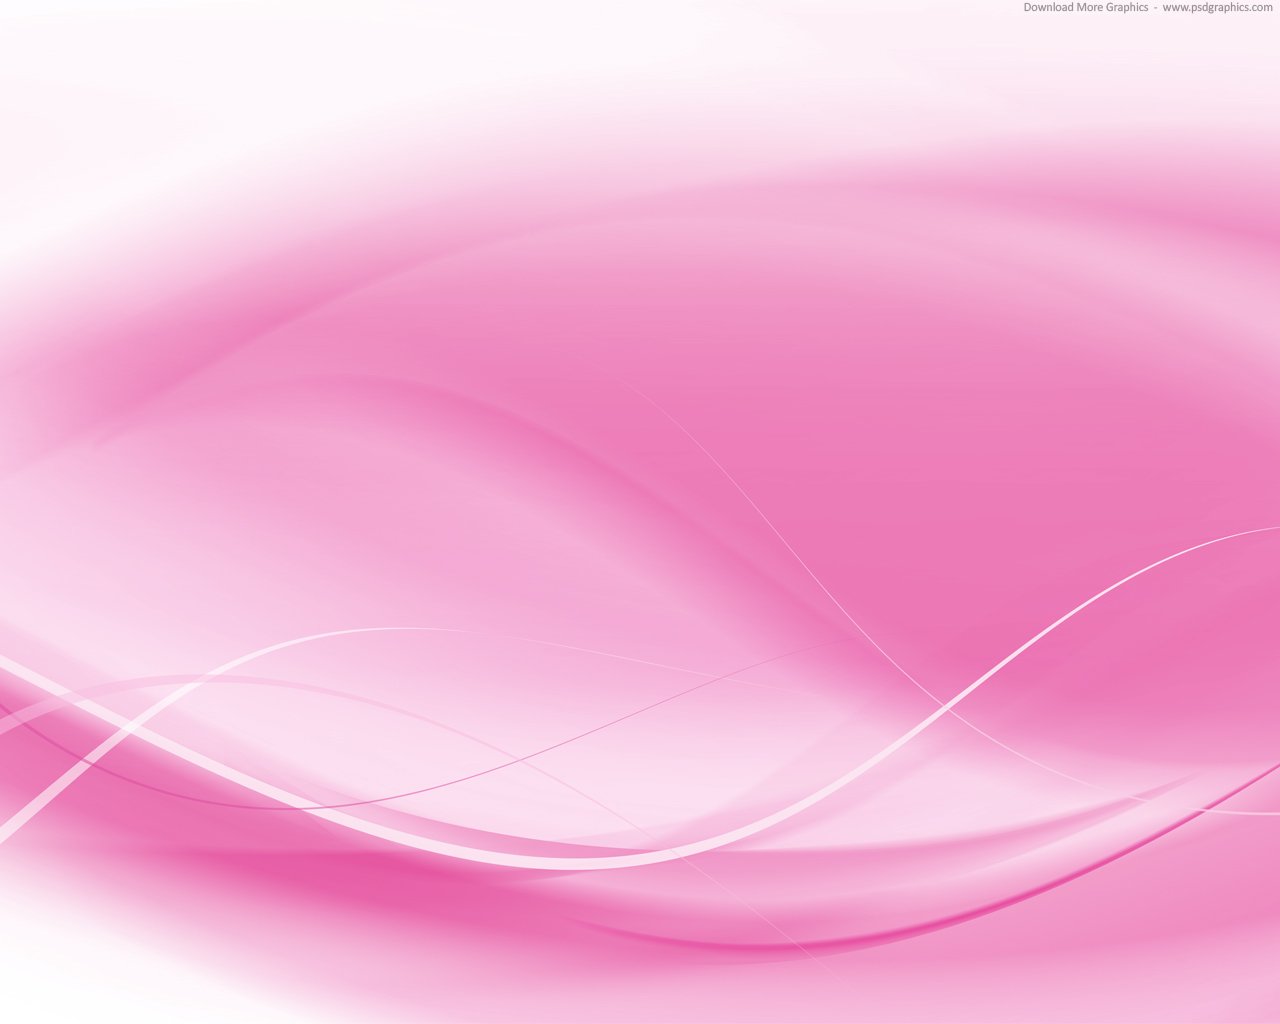 Medium size preview 1280x1024px Soft pink background